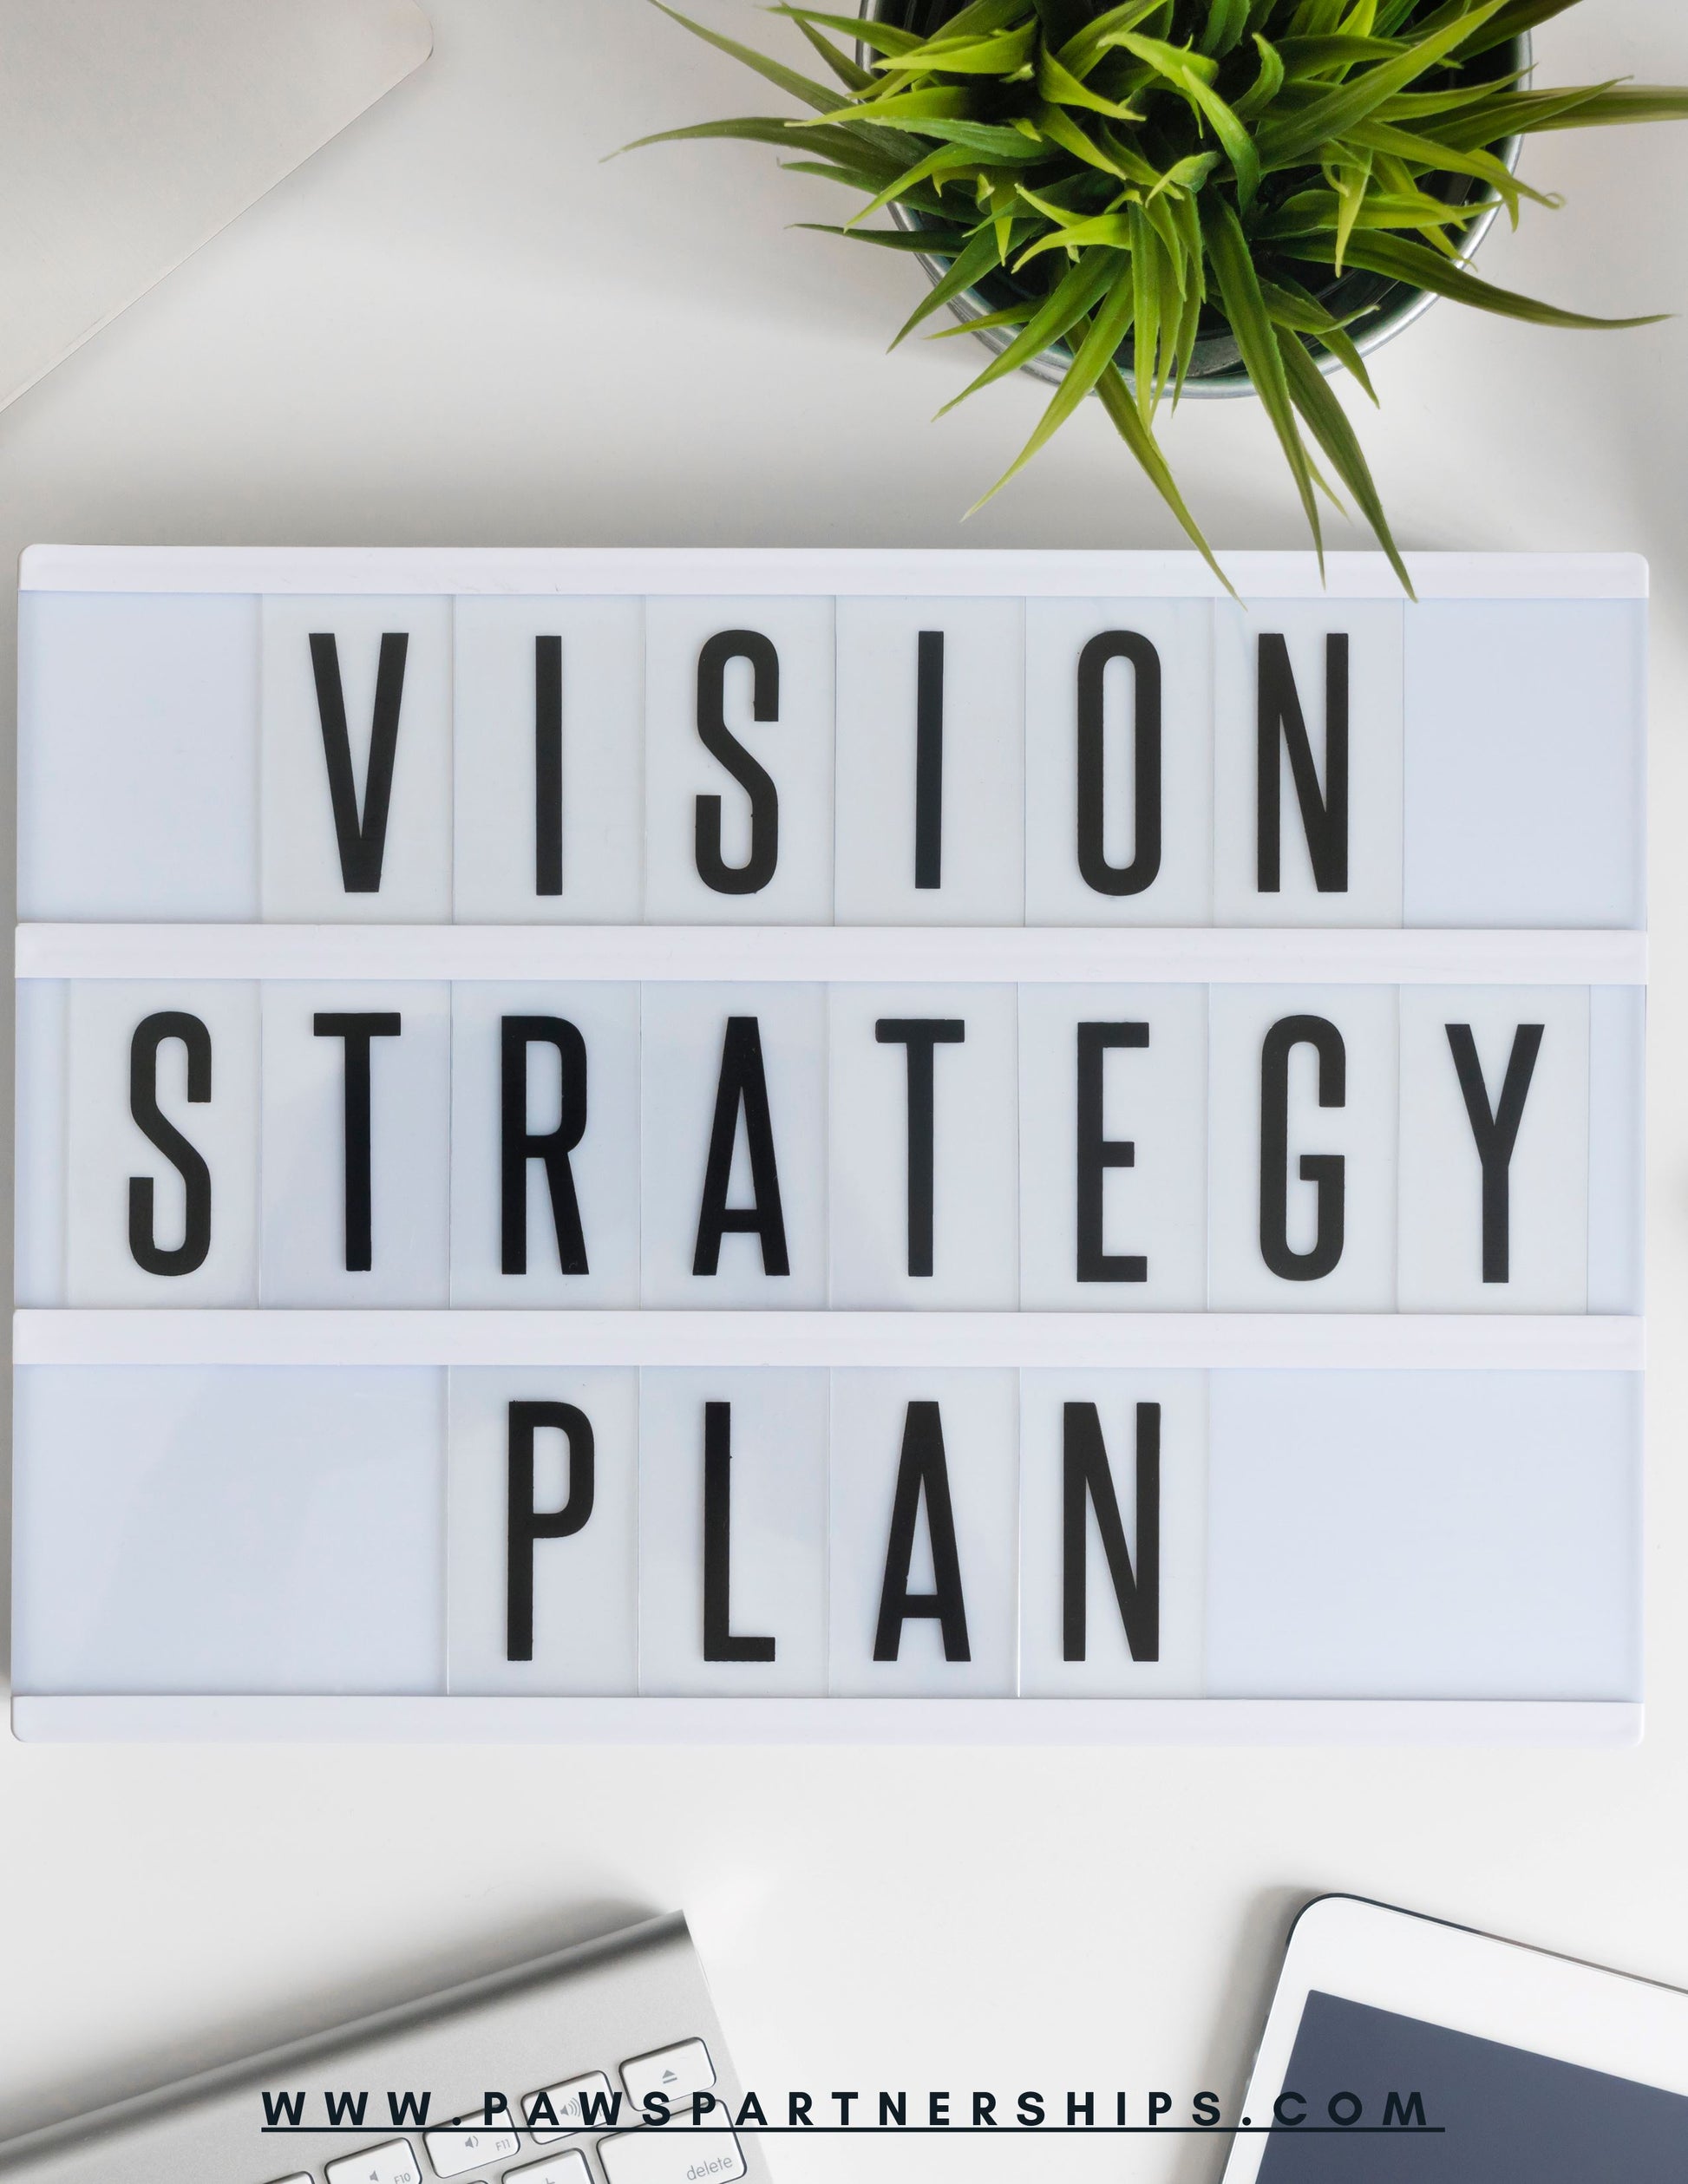 The Vision Strategy Planner provides an essential roadmap for every organization’s growth and success, helping to define and achieve goals. With organized layouts, this planner allows you to track progress and develop a strategy tailored to your individual needs. An absolute must-have for long-term success.